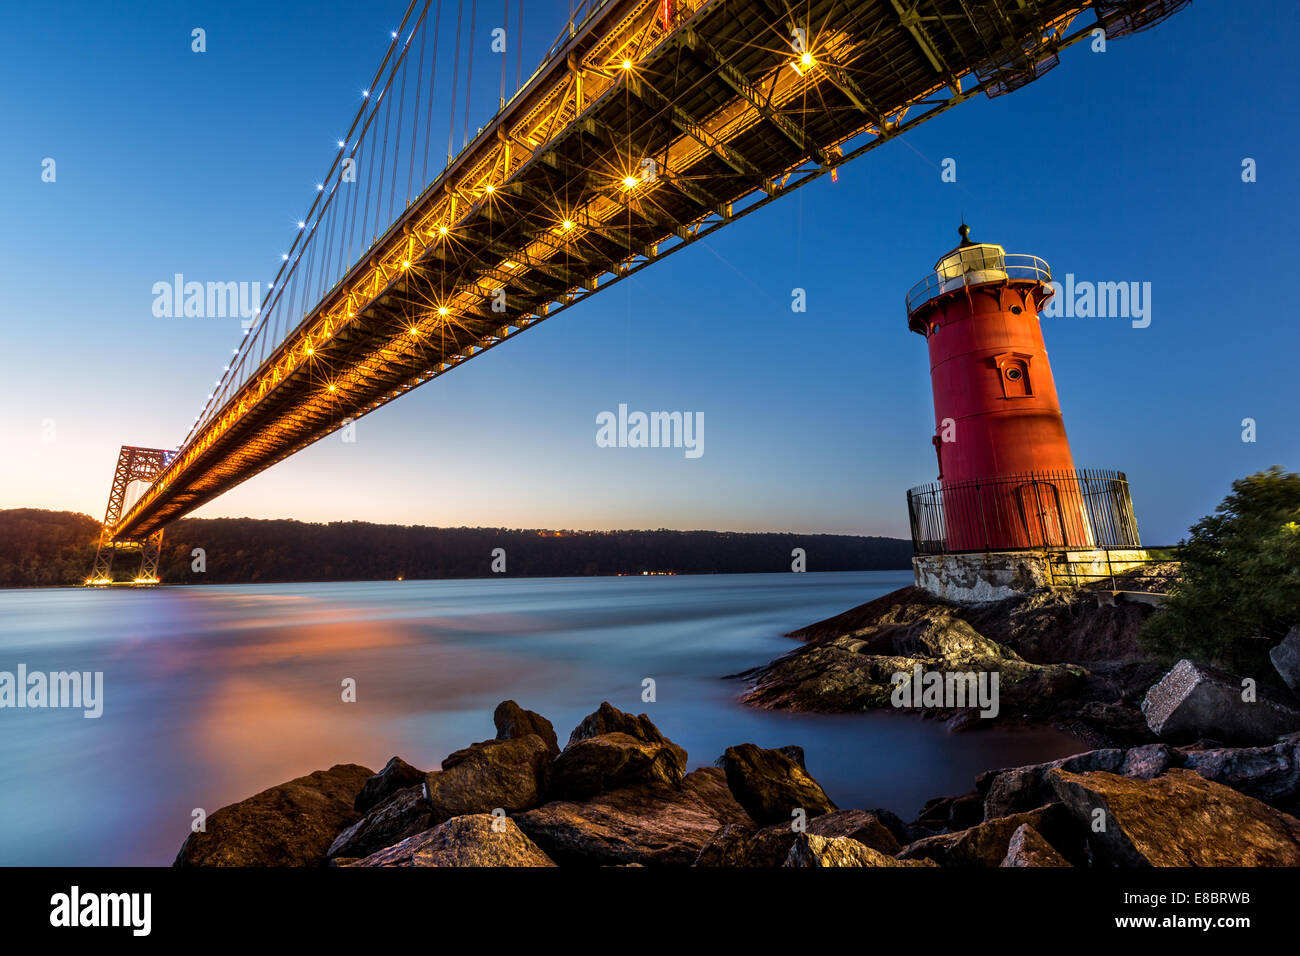 George Washington Bridge and the Little Red Lighthouse on the Hudson River in New York Stock Photo